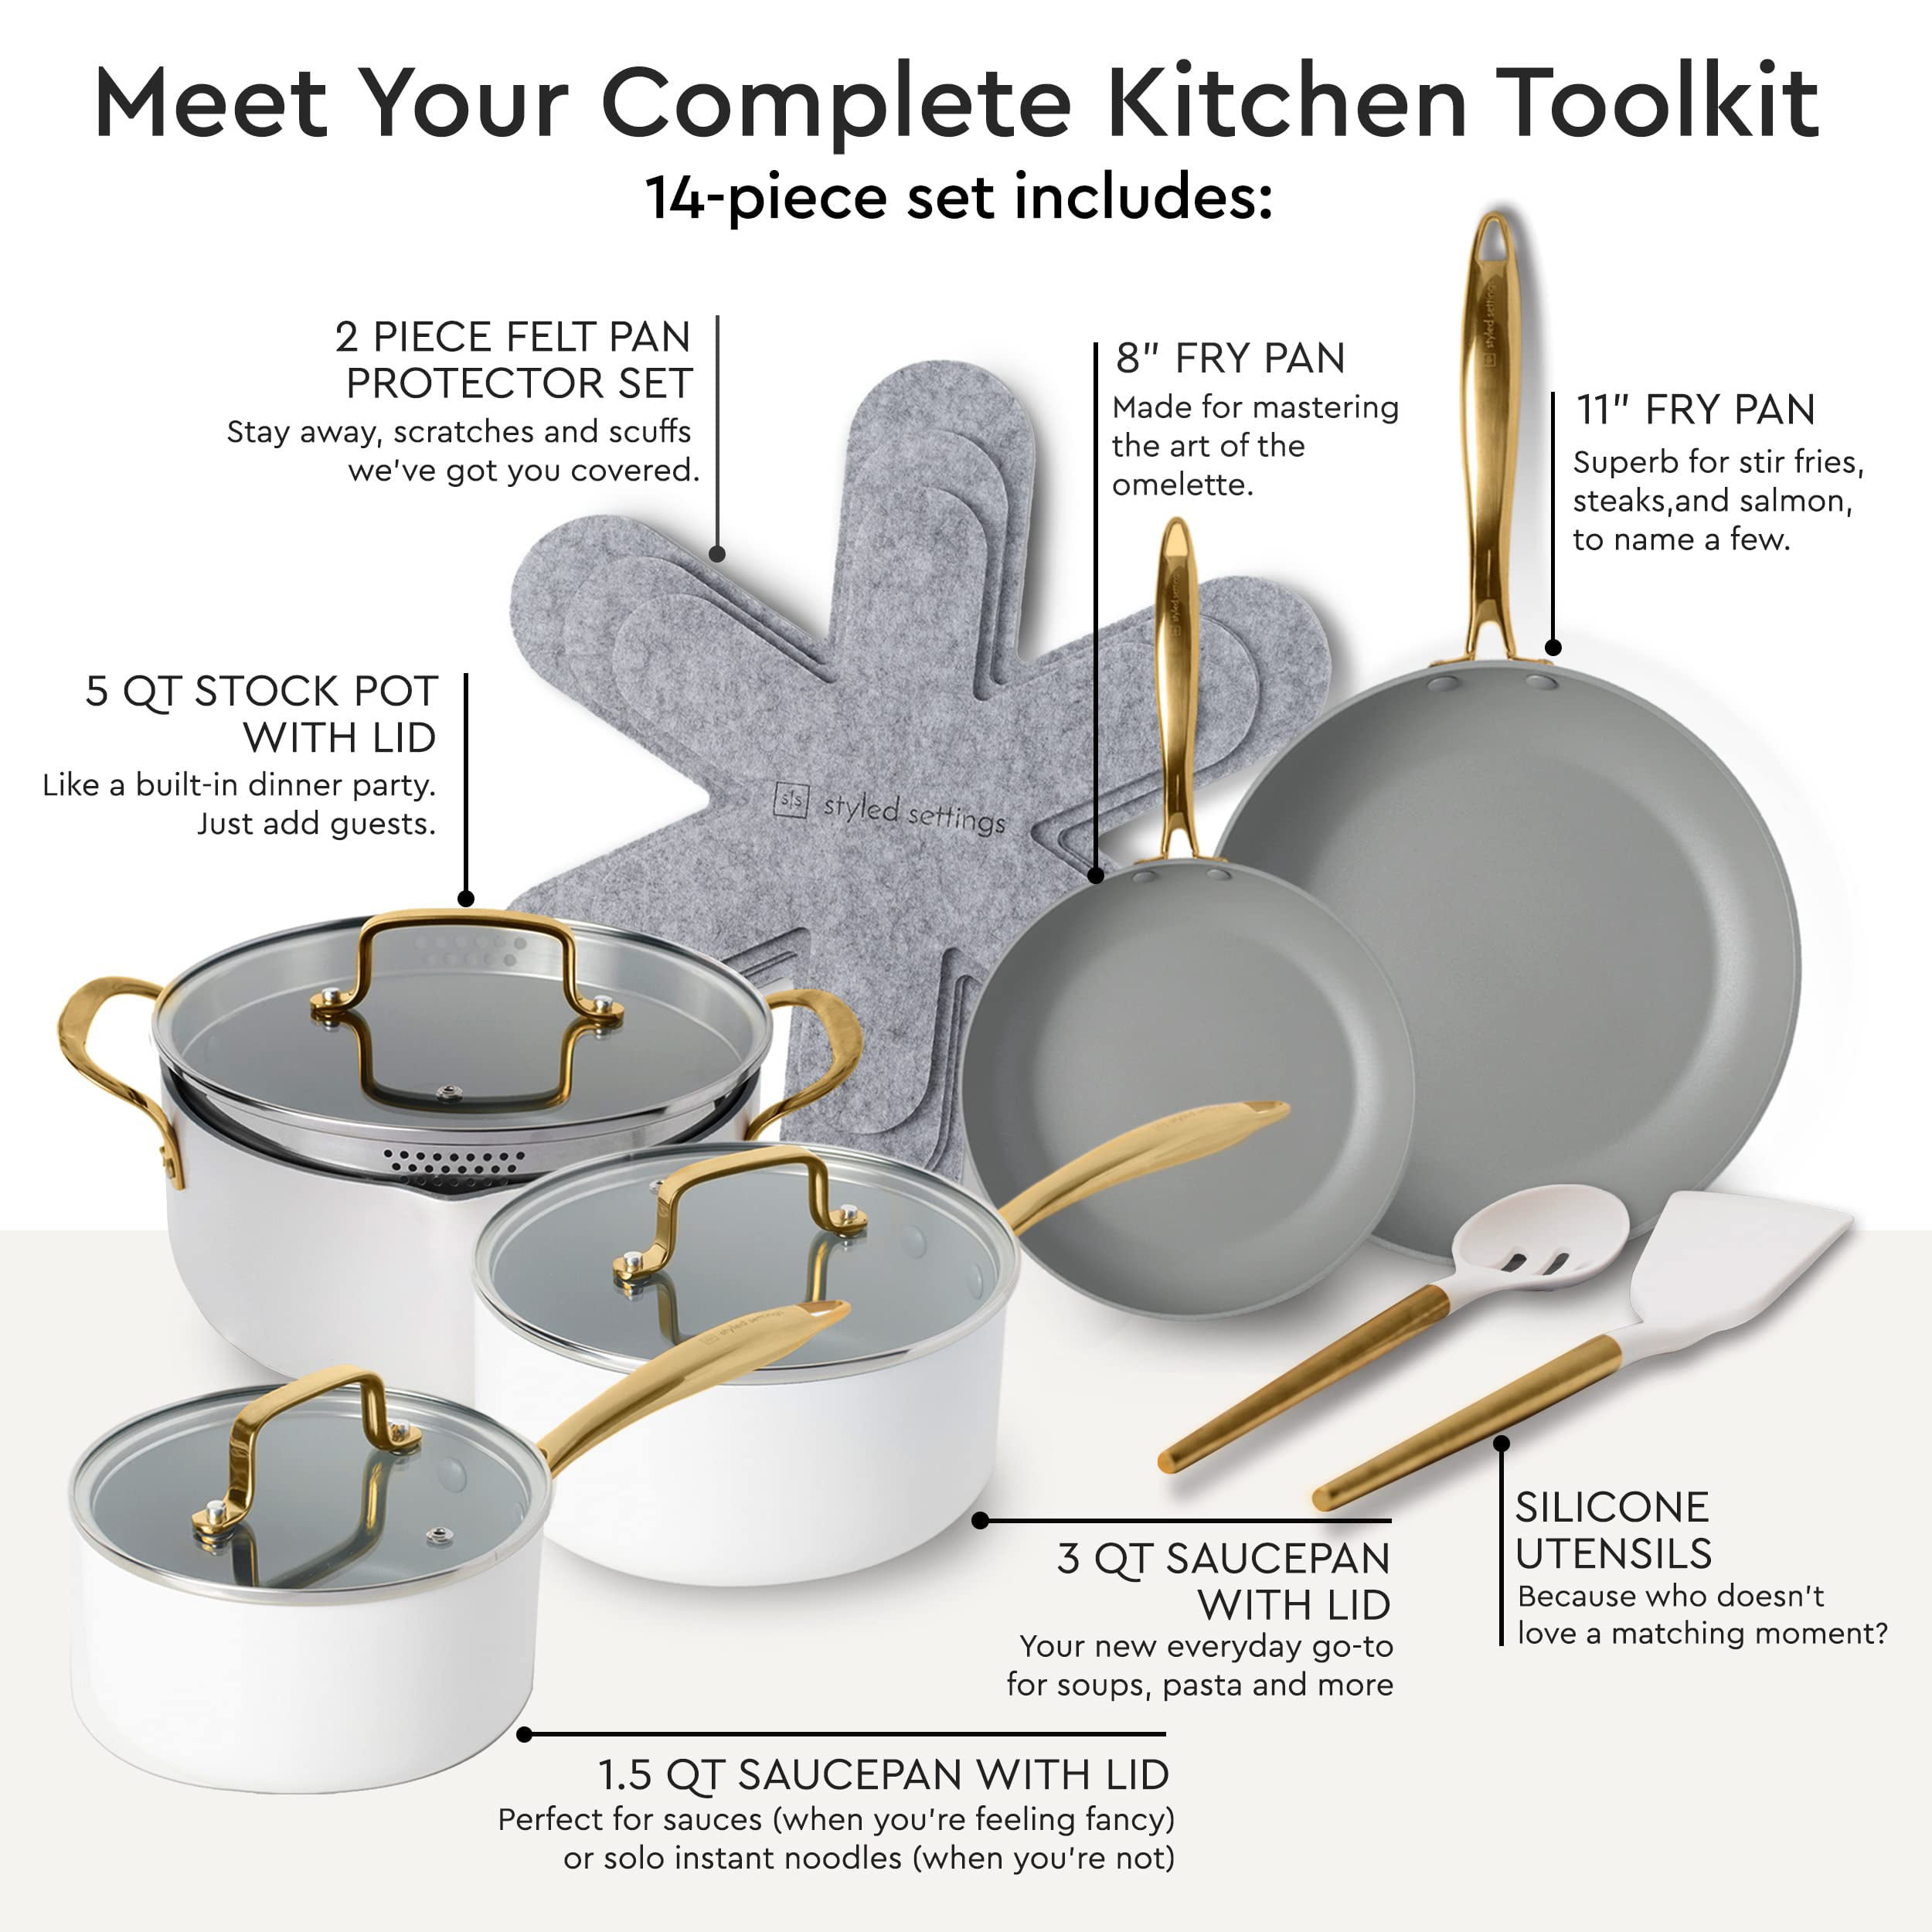 Healthy Cookware: How To How to Find the Safest Pots and Pans